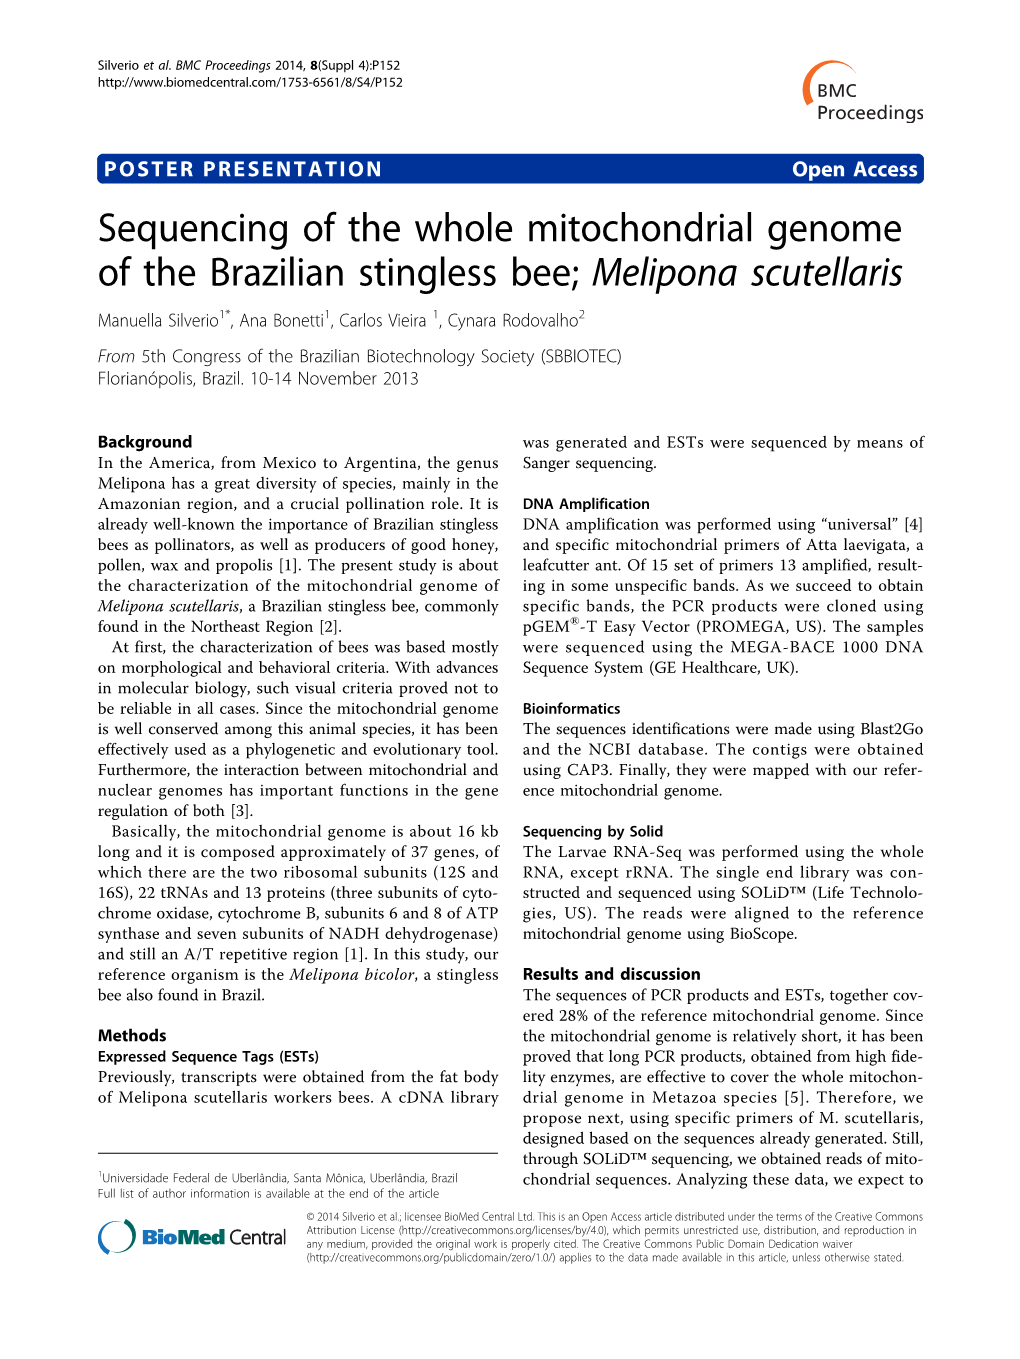 Sequencing of the Whole Mitochondrial Genome of The